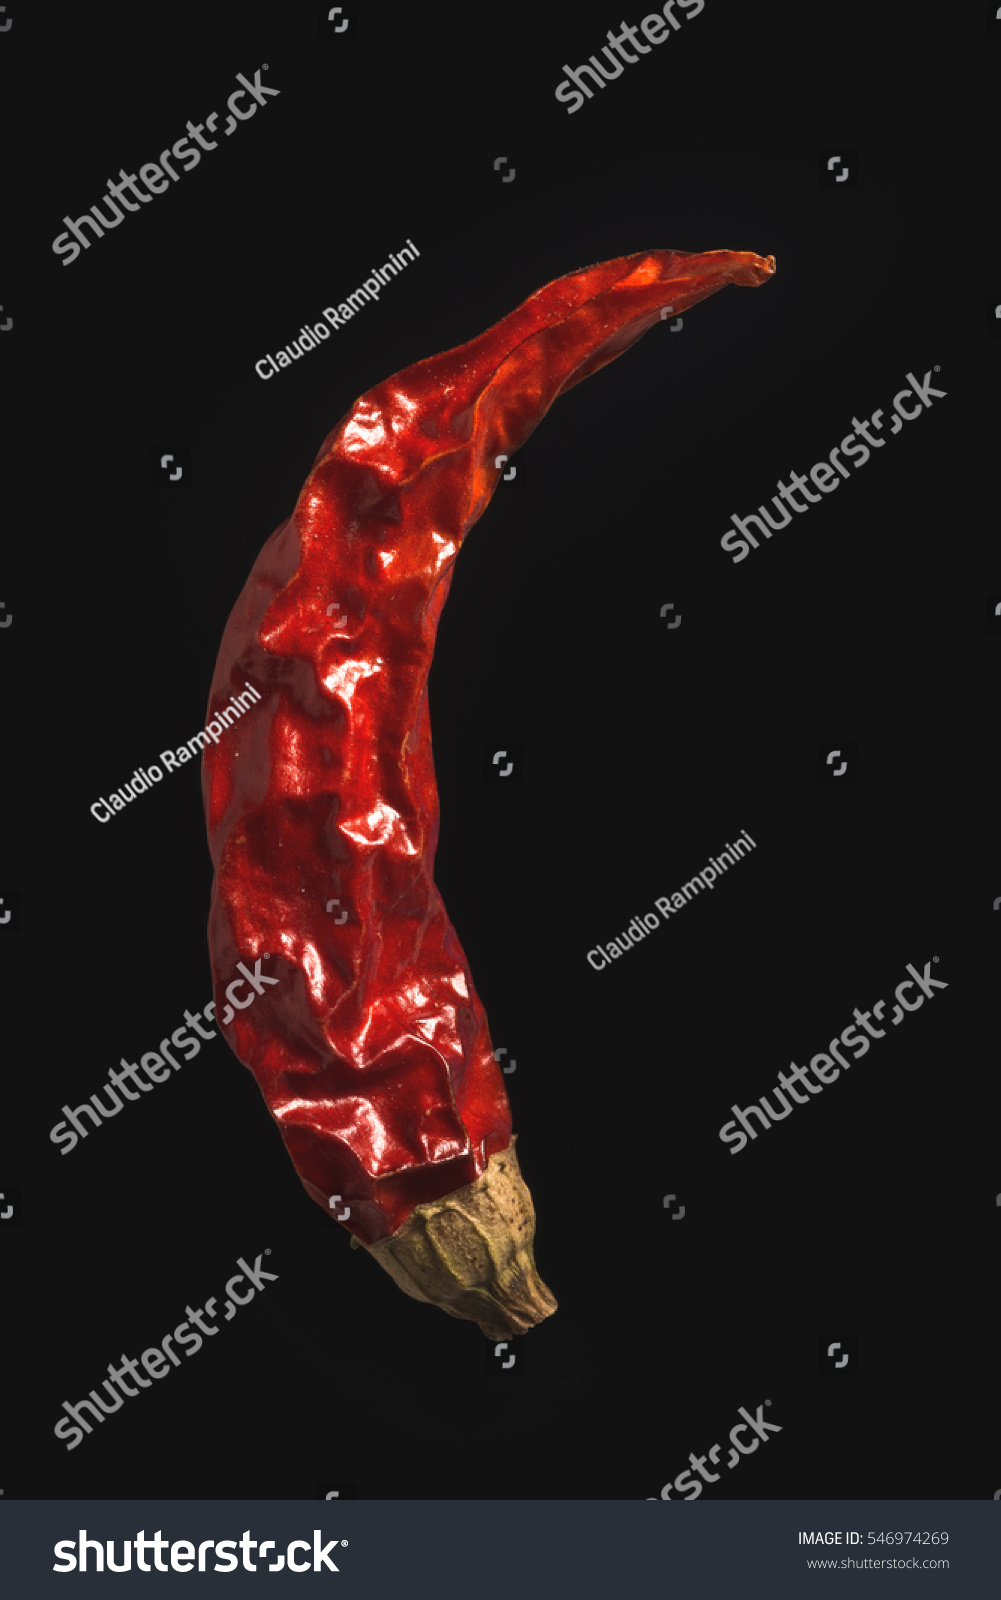 Dry chili pepper on isolated black background close-up #546974269